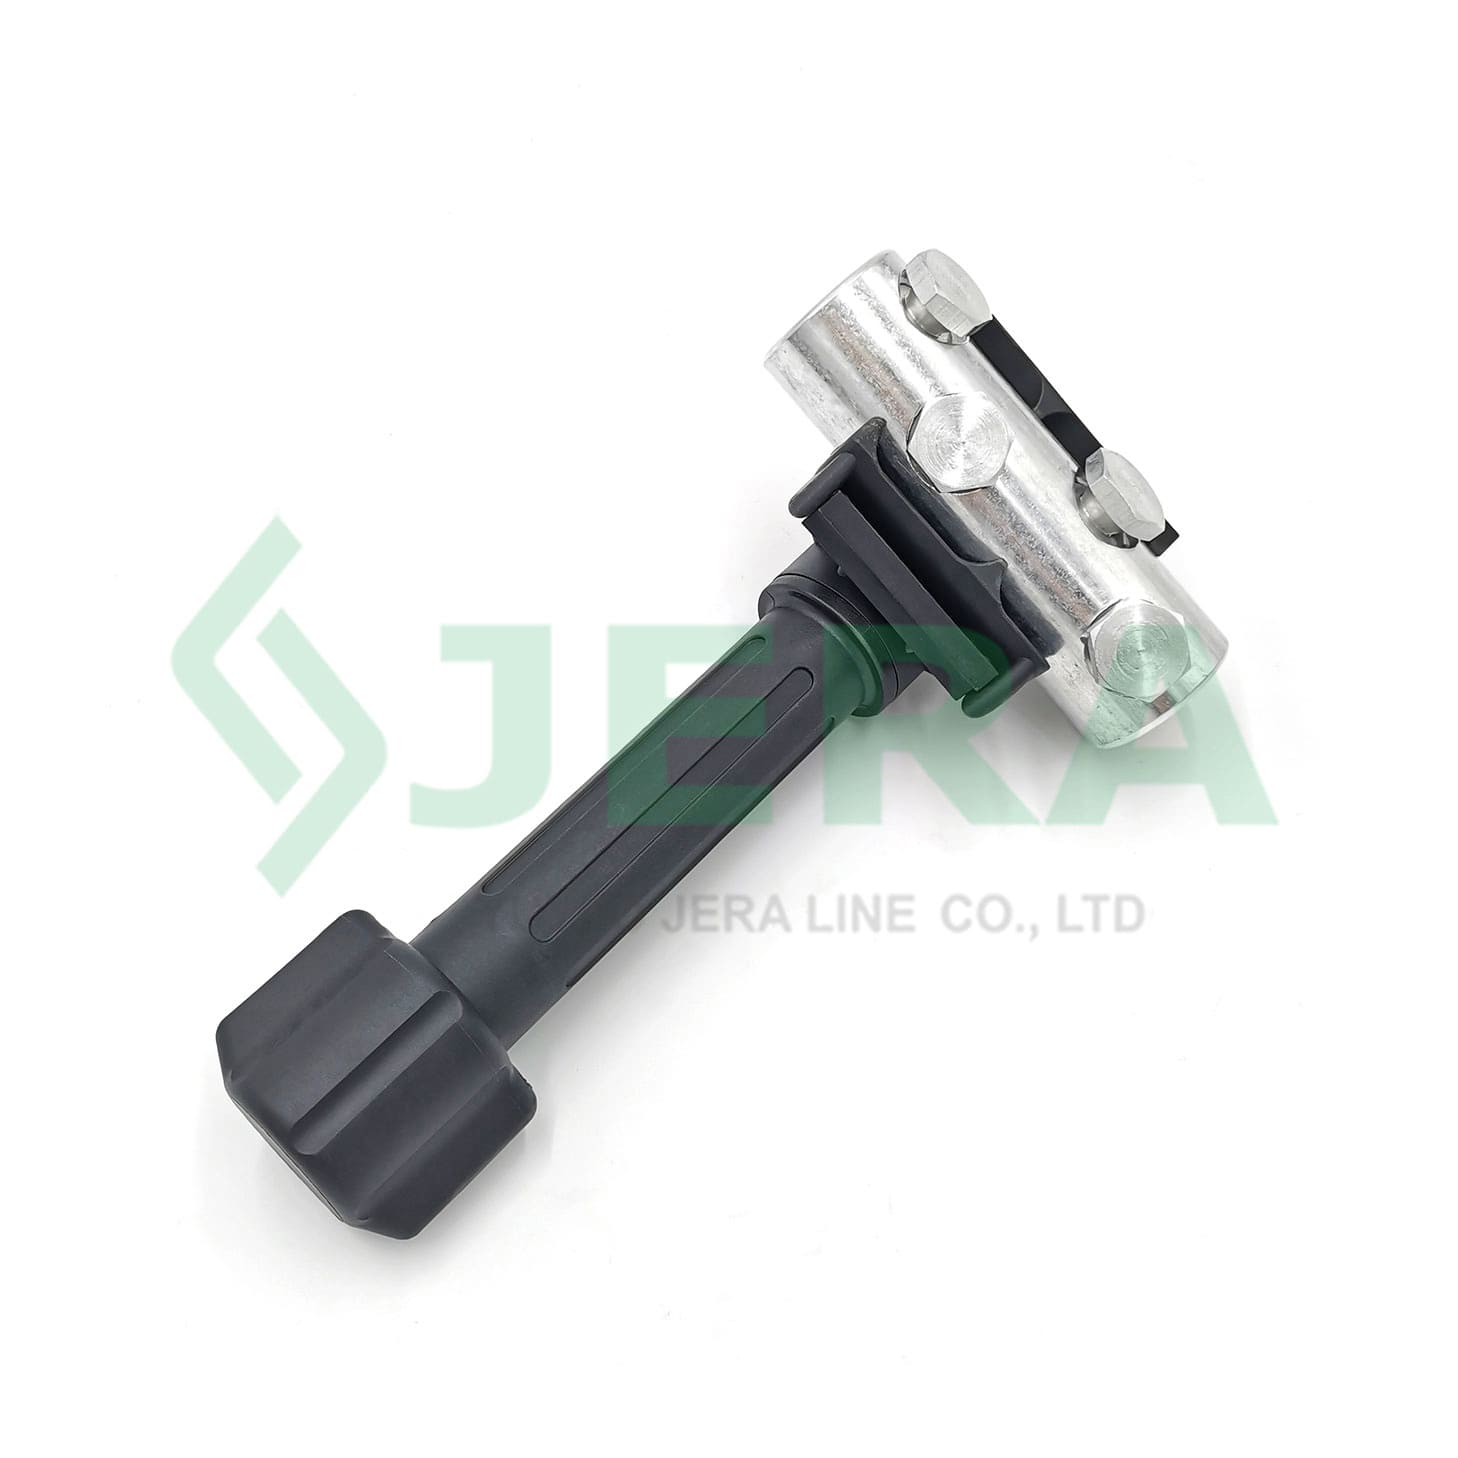 Holding tool for mechanical bolted lugs (14-42 mm), JTN-10 